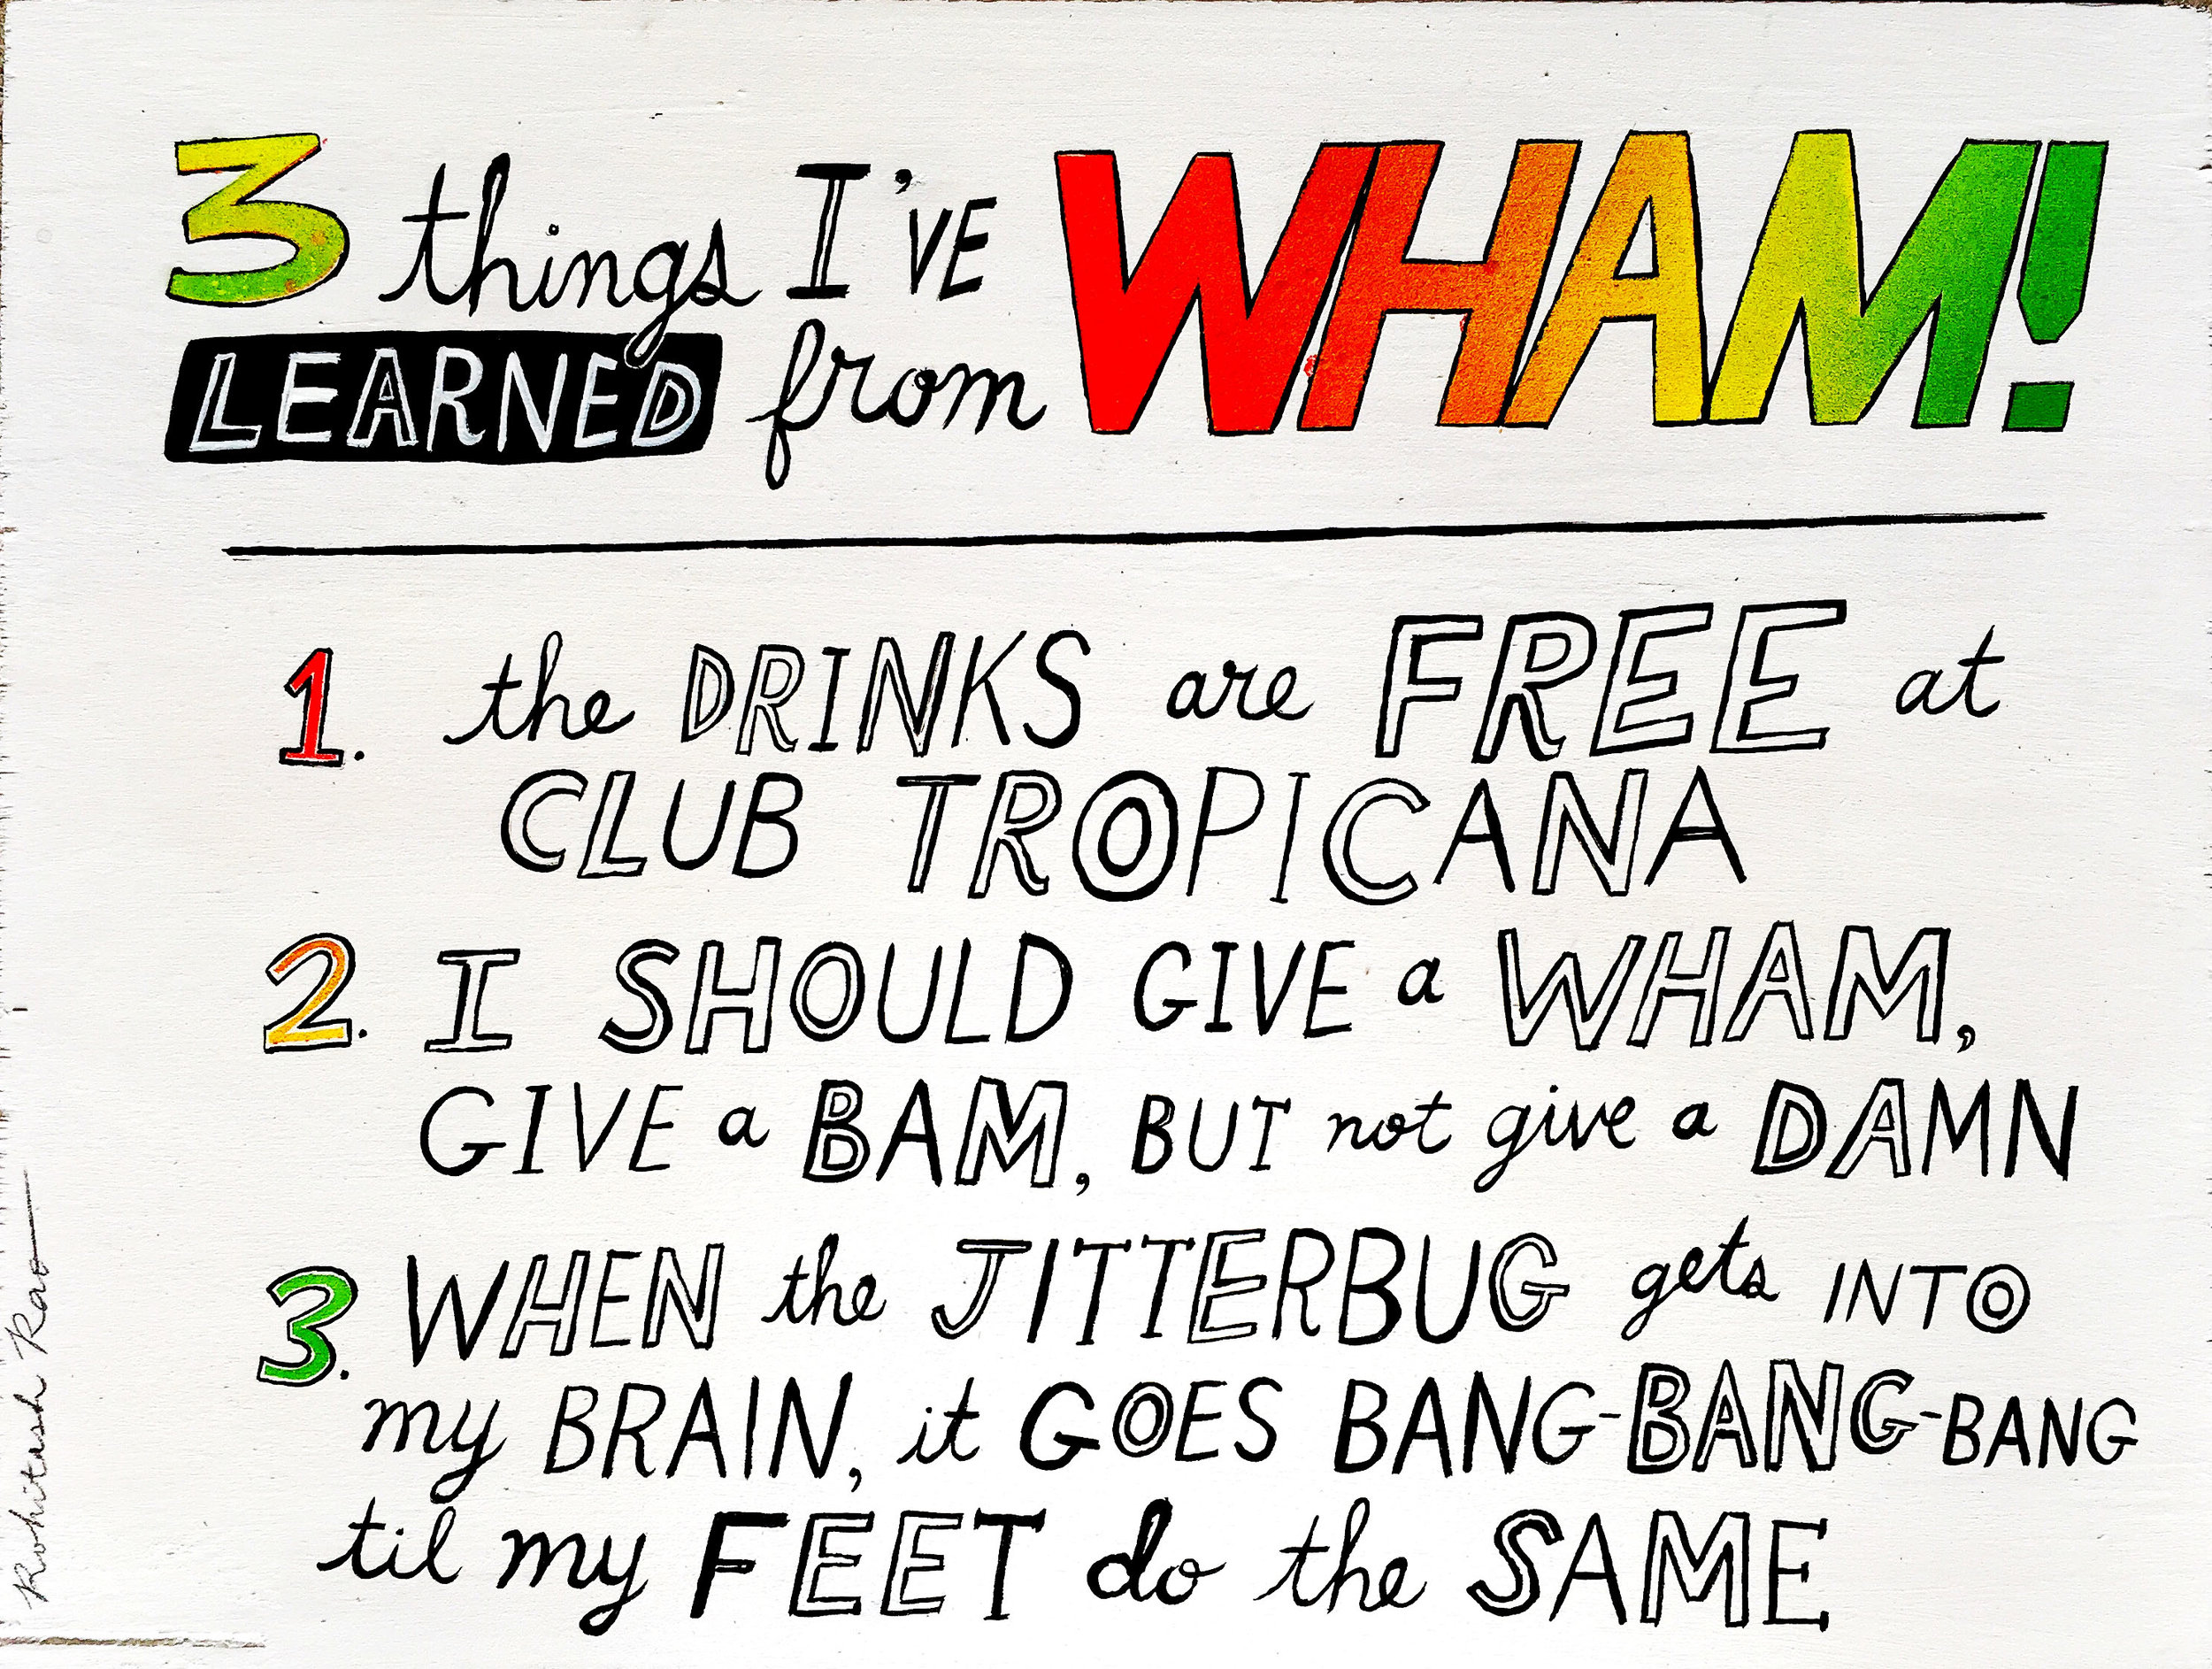 3 THINGS I'VE LEARNED FROM WHAM